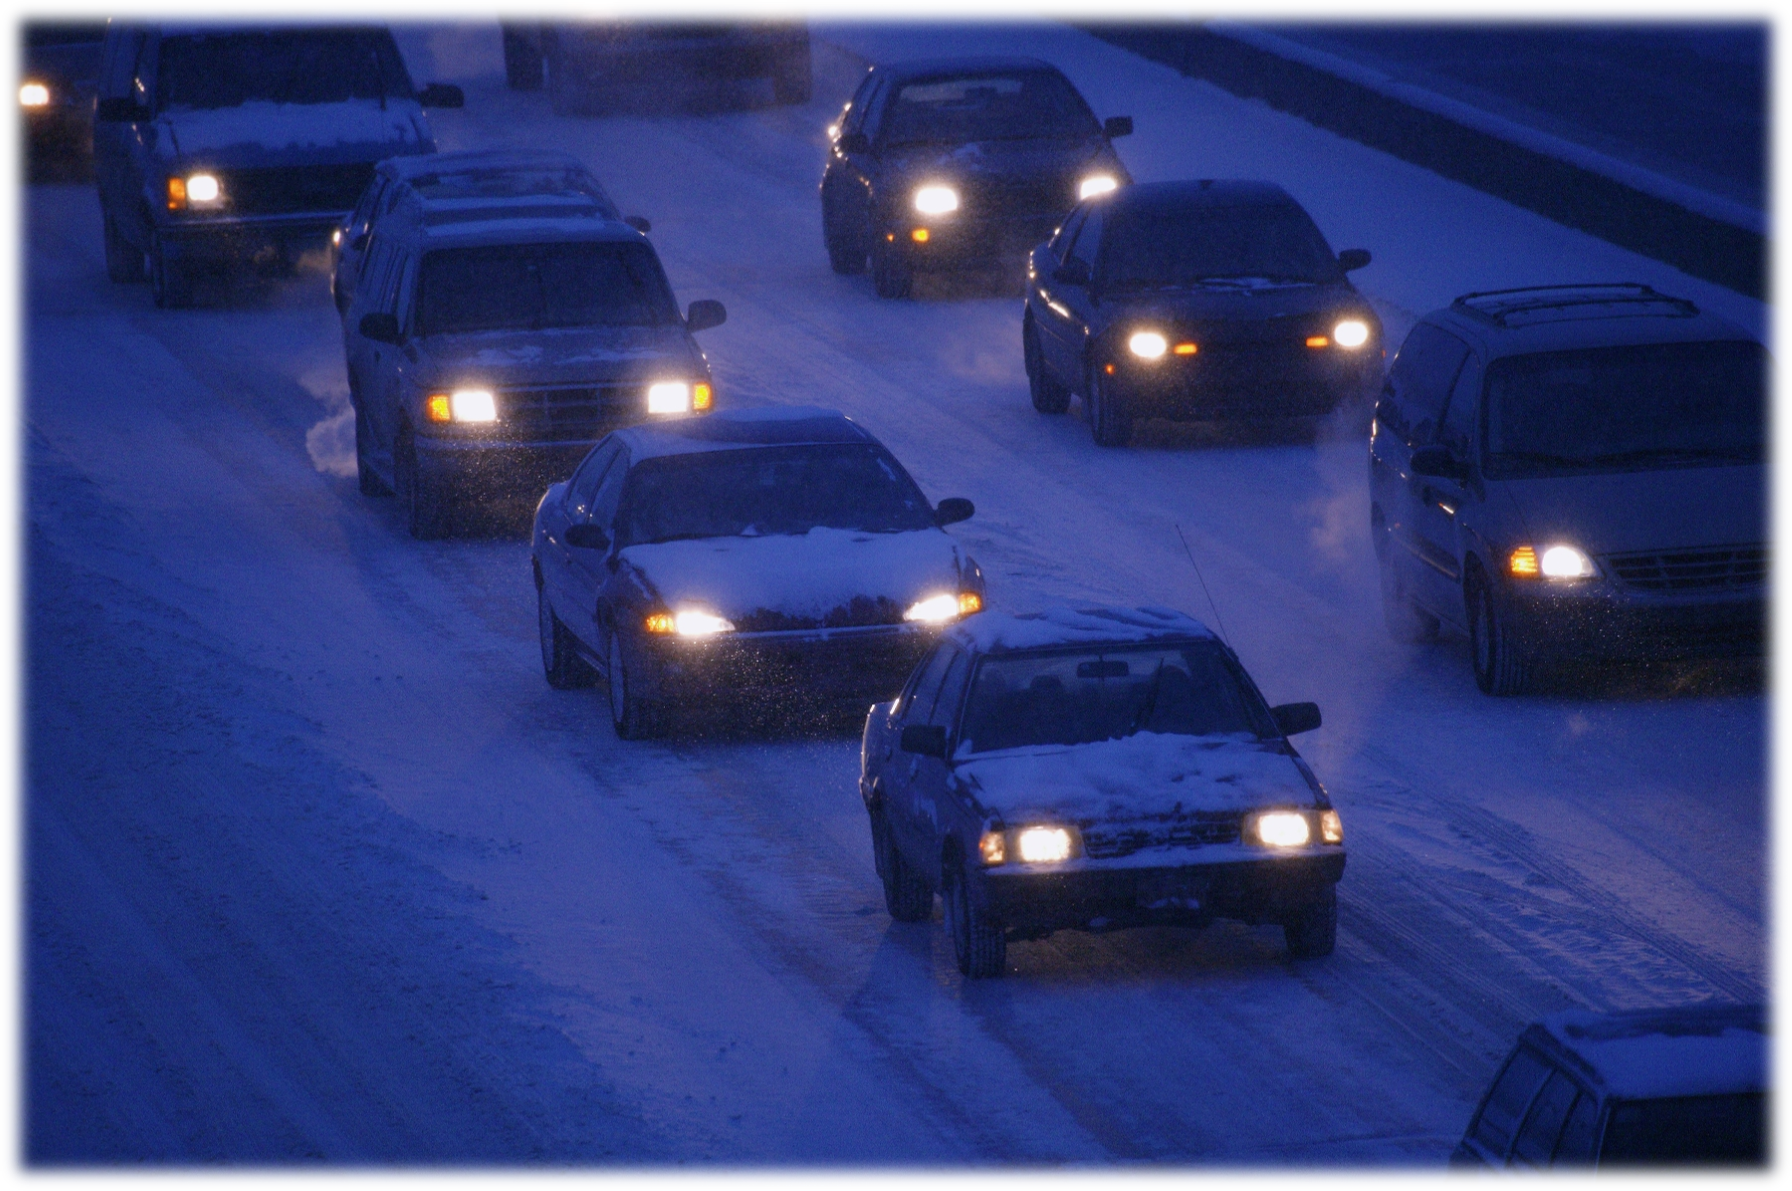 Link to Driving Safety - Vehicles on snowy dark highway with lights on.